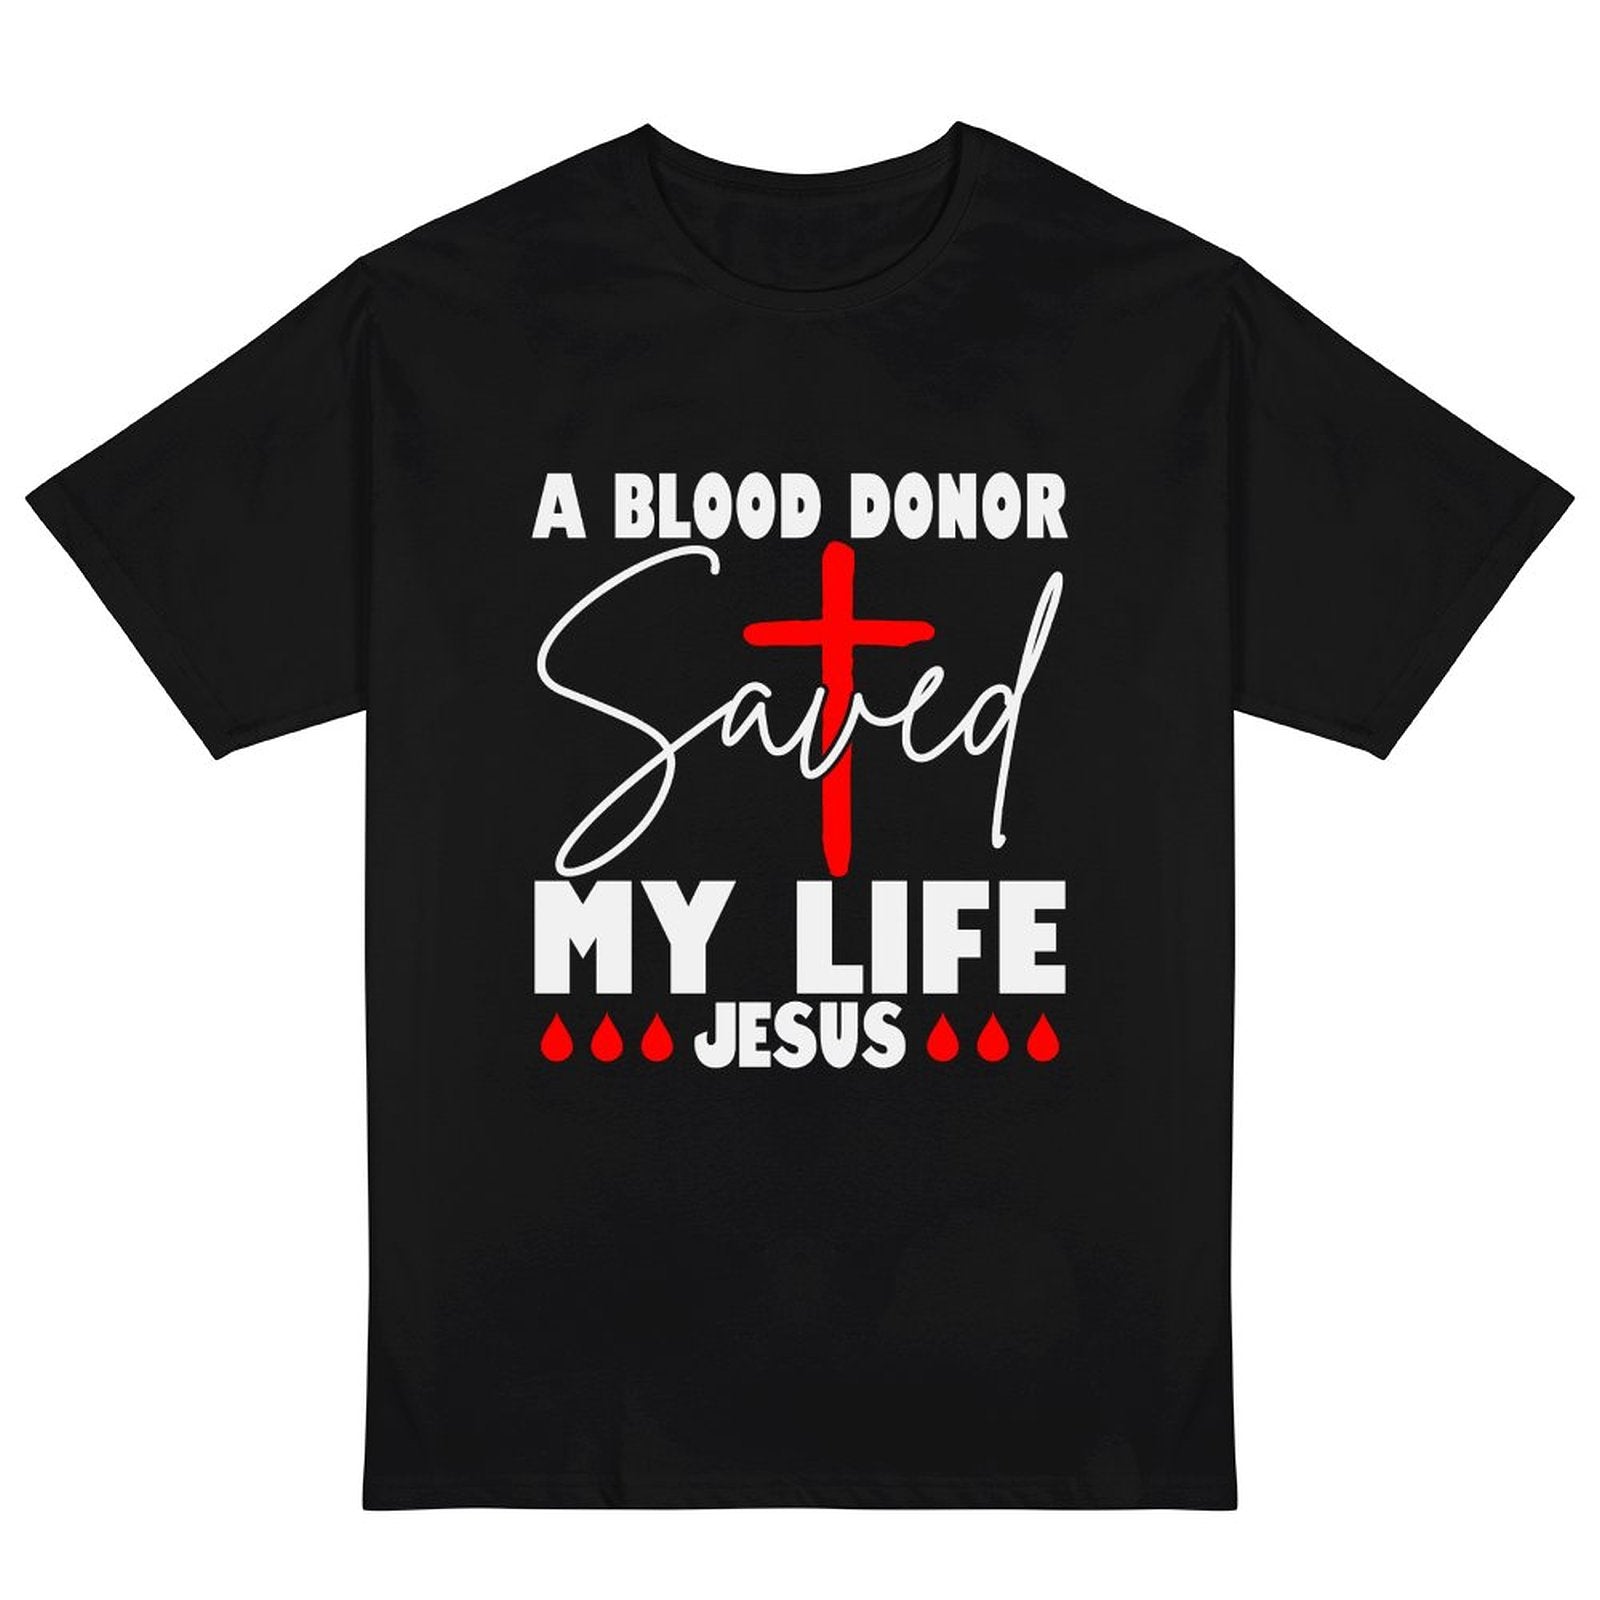 A Blood Donor Saved My Life Jesus Women's Christian T-shirt SALE-Personal Design